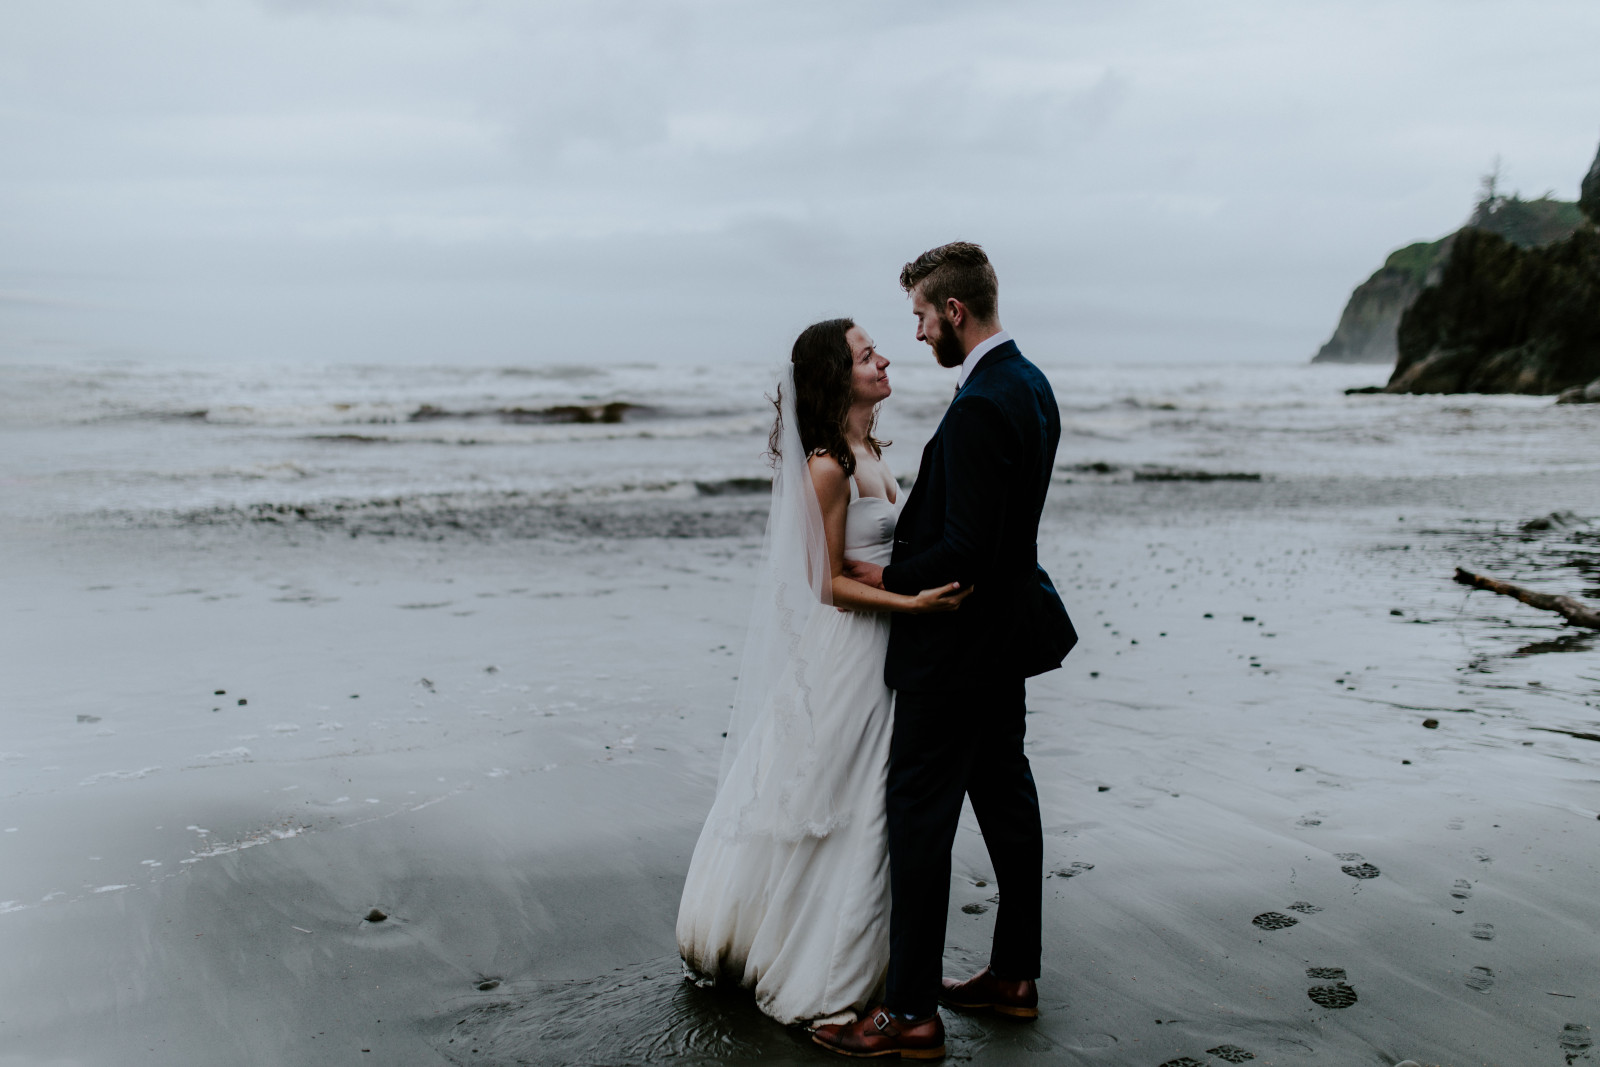 Mollie and Corey stand together on the beach. Elopement photography at Olympic National Park by Sienna Plus Josh.